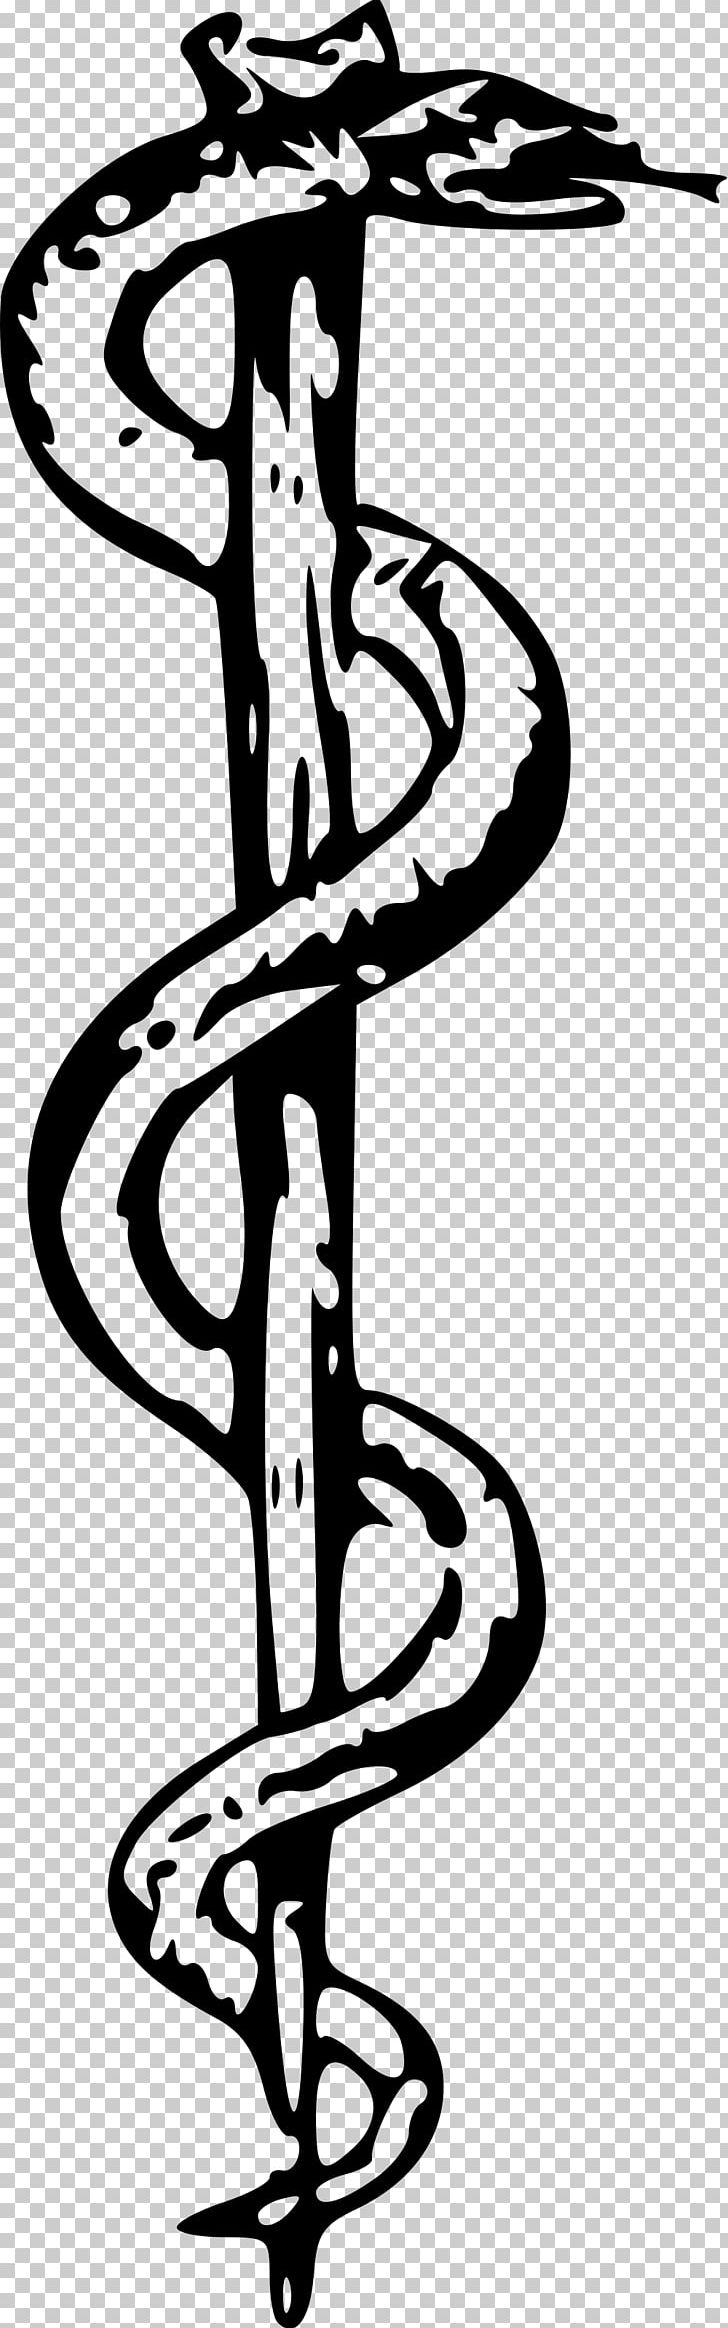 Staff Of Hermes Rod Of Asclepius Caduceus As A Symbol Of Medicine PNG, Clipart, Animals, Apollo, Area, Art, Artwork Free PNG Download